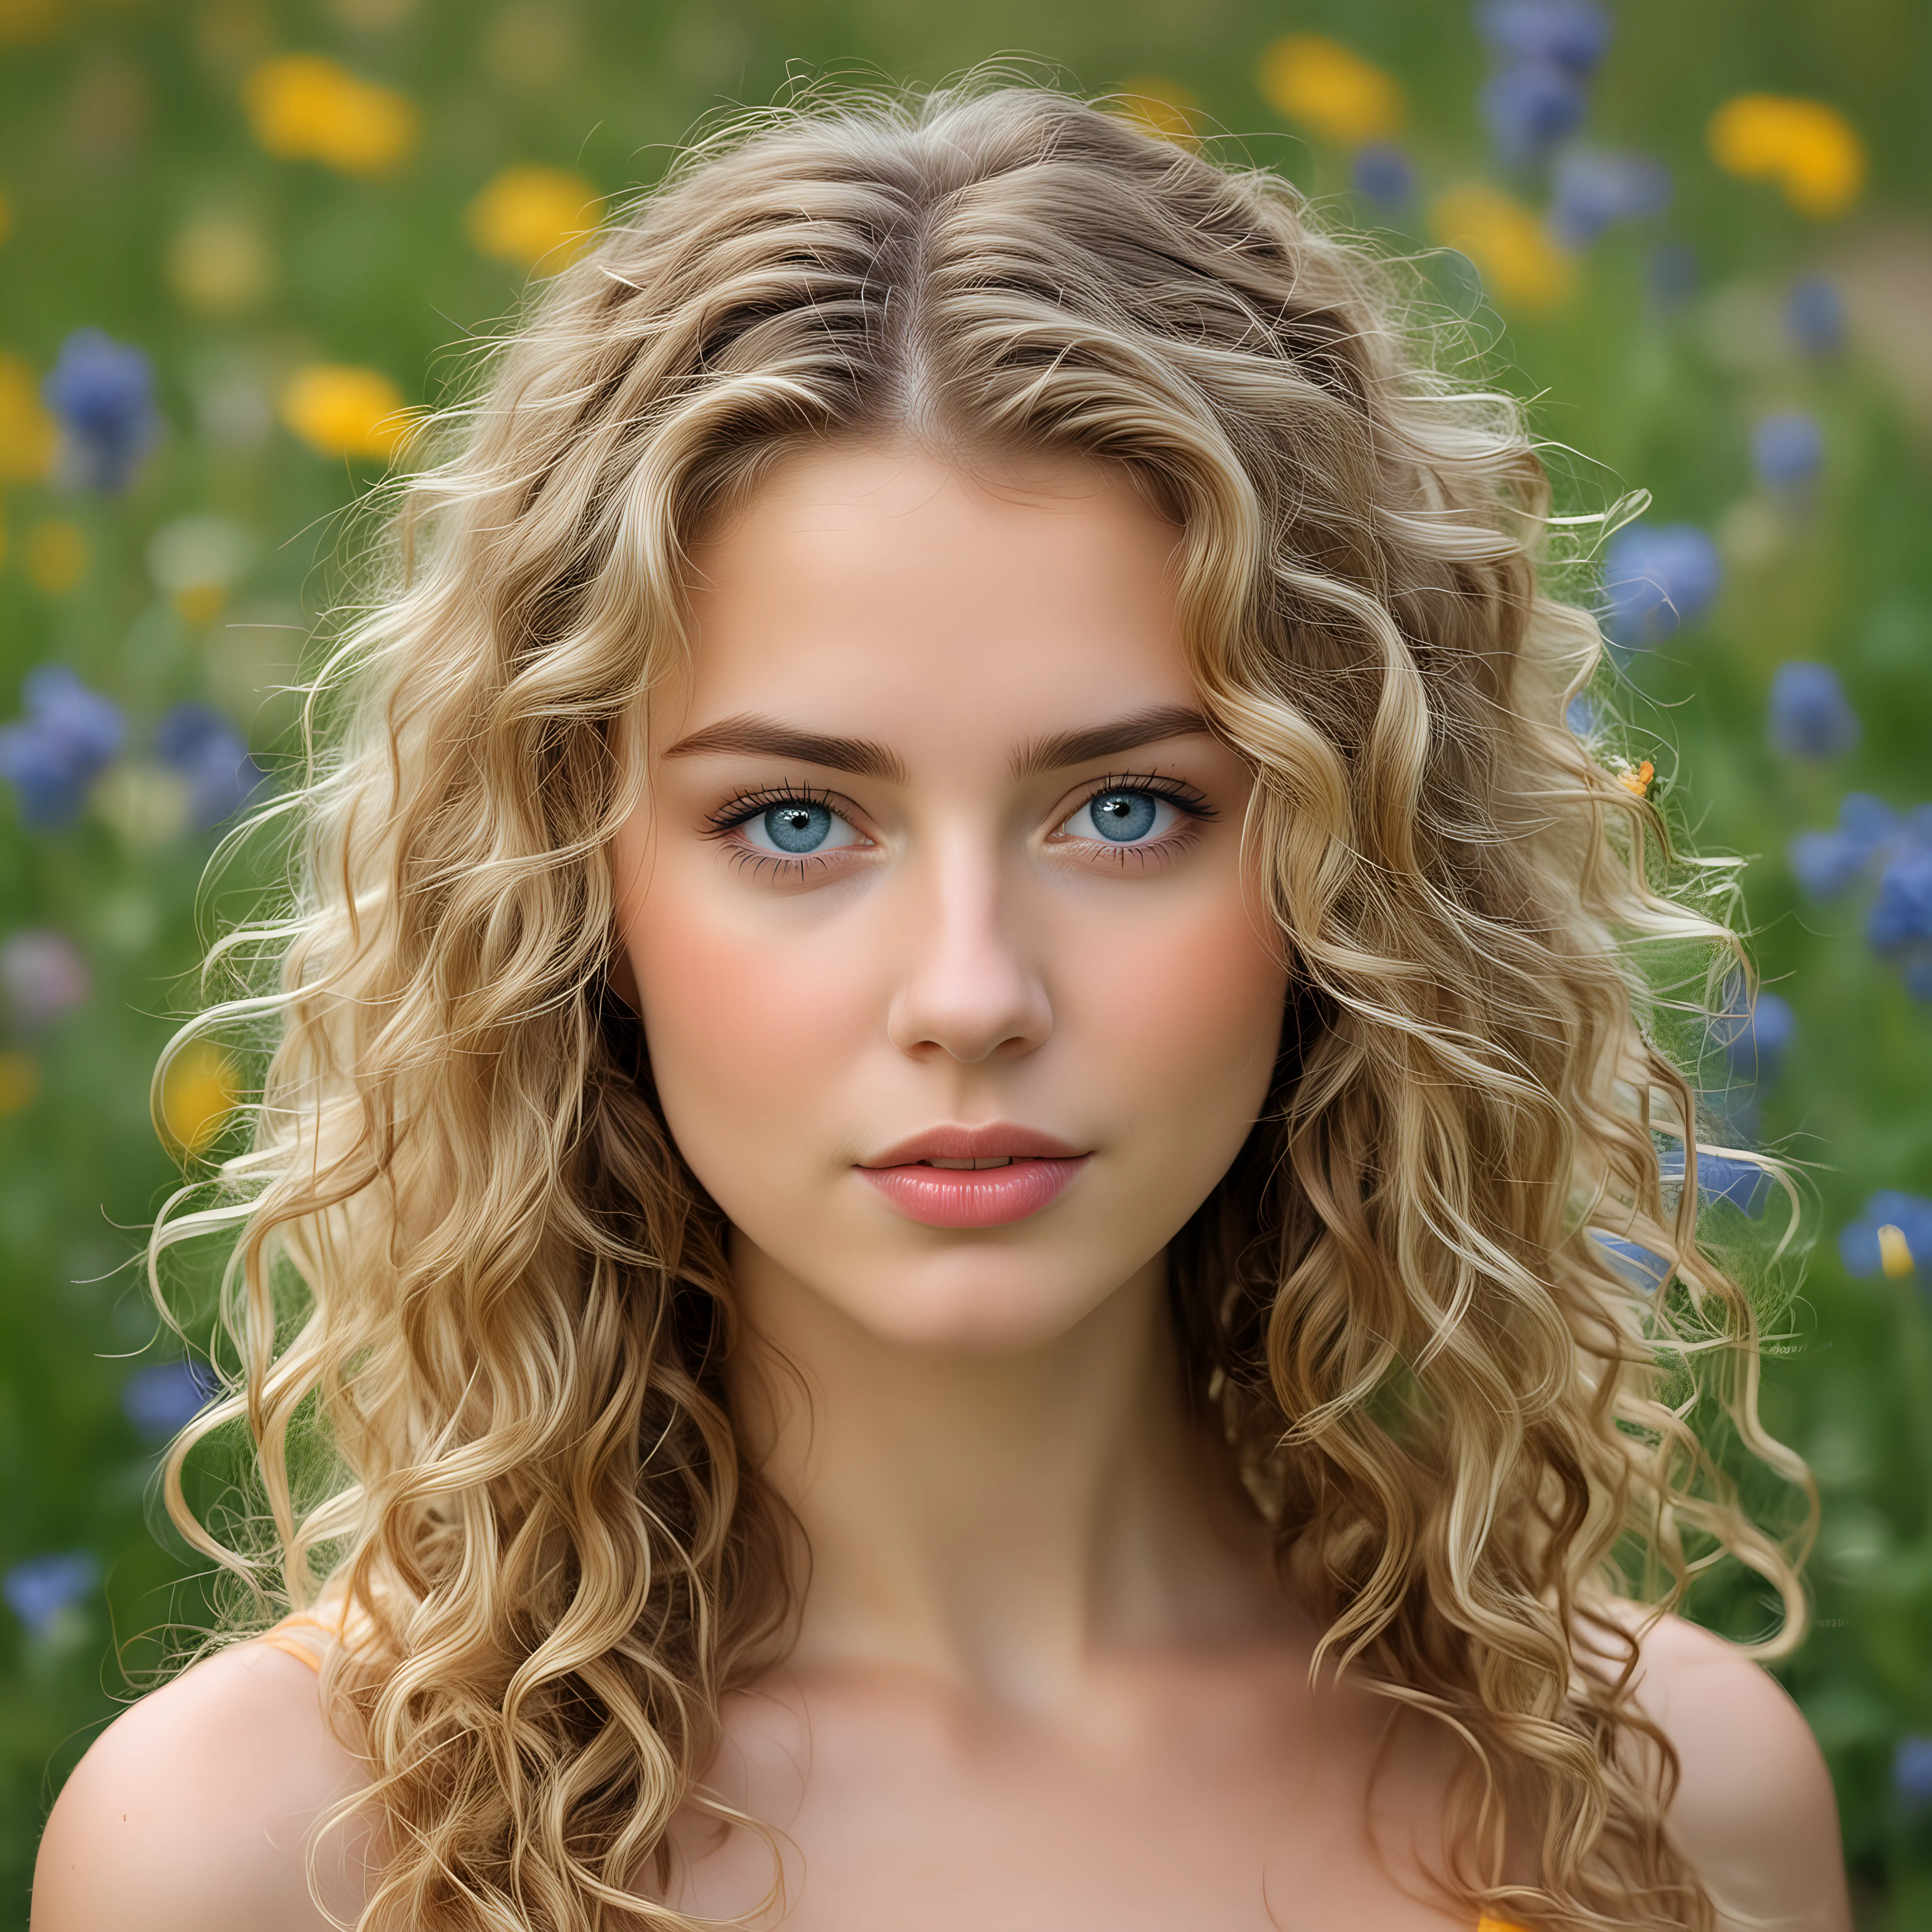 Young Woman with Long Curly Blond Hair Amid Spring Wildflowers Renoir Inspired Portrait